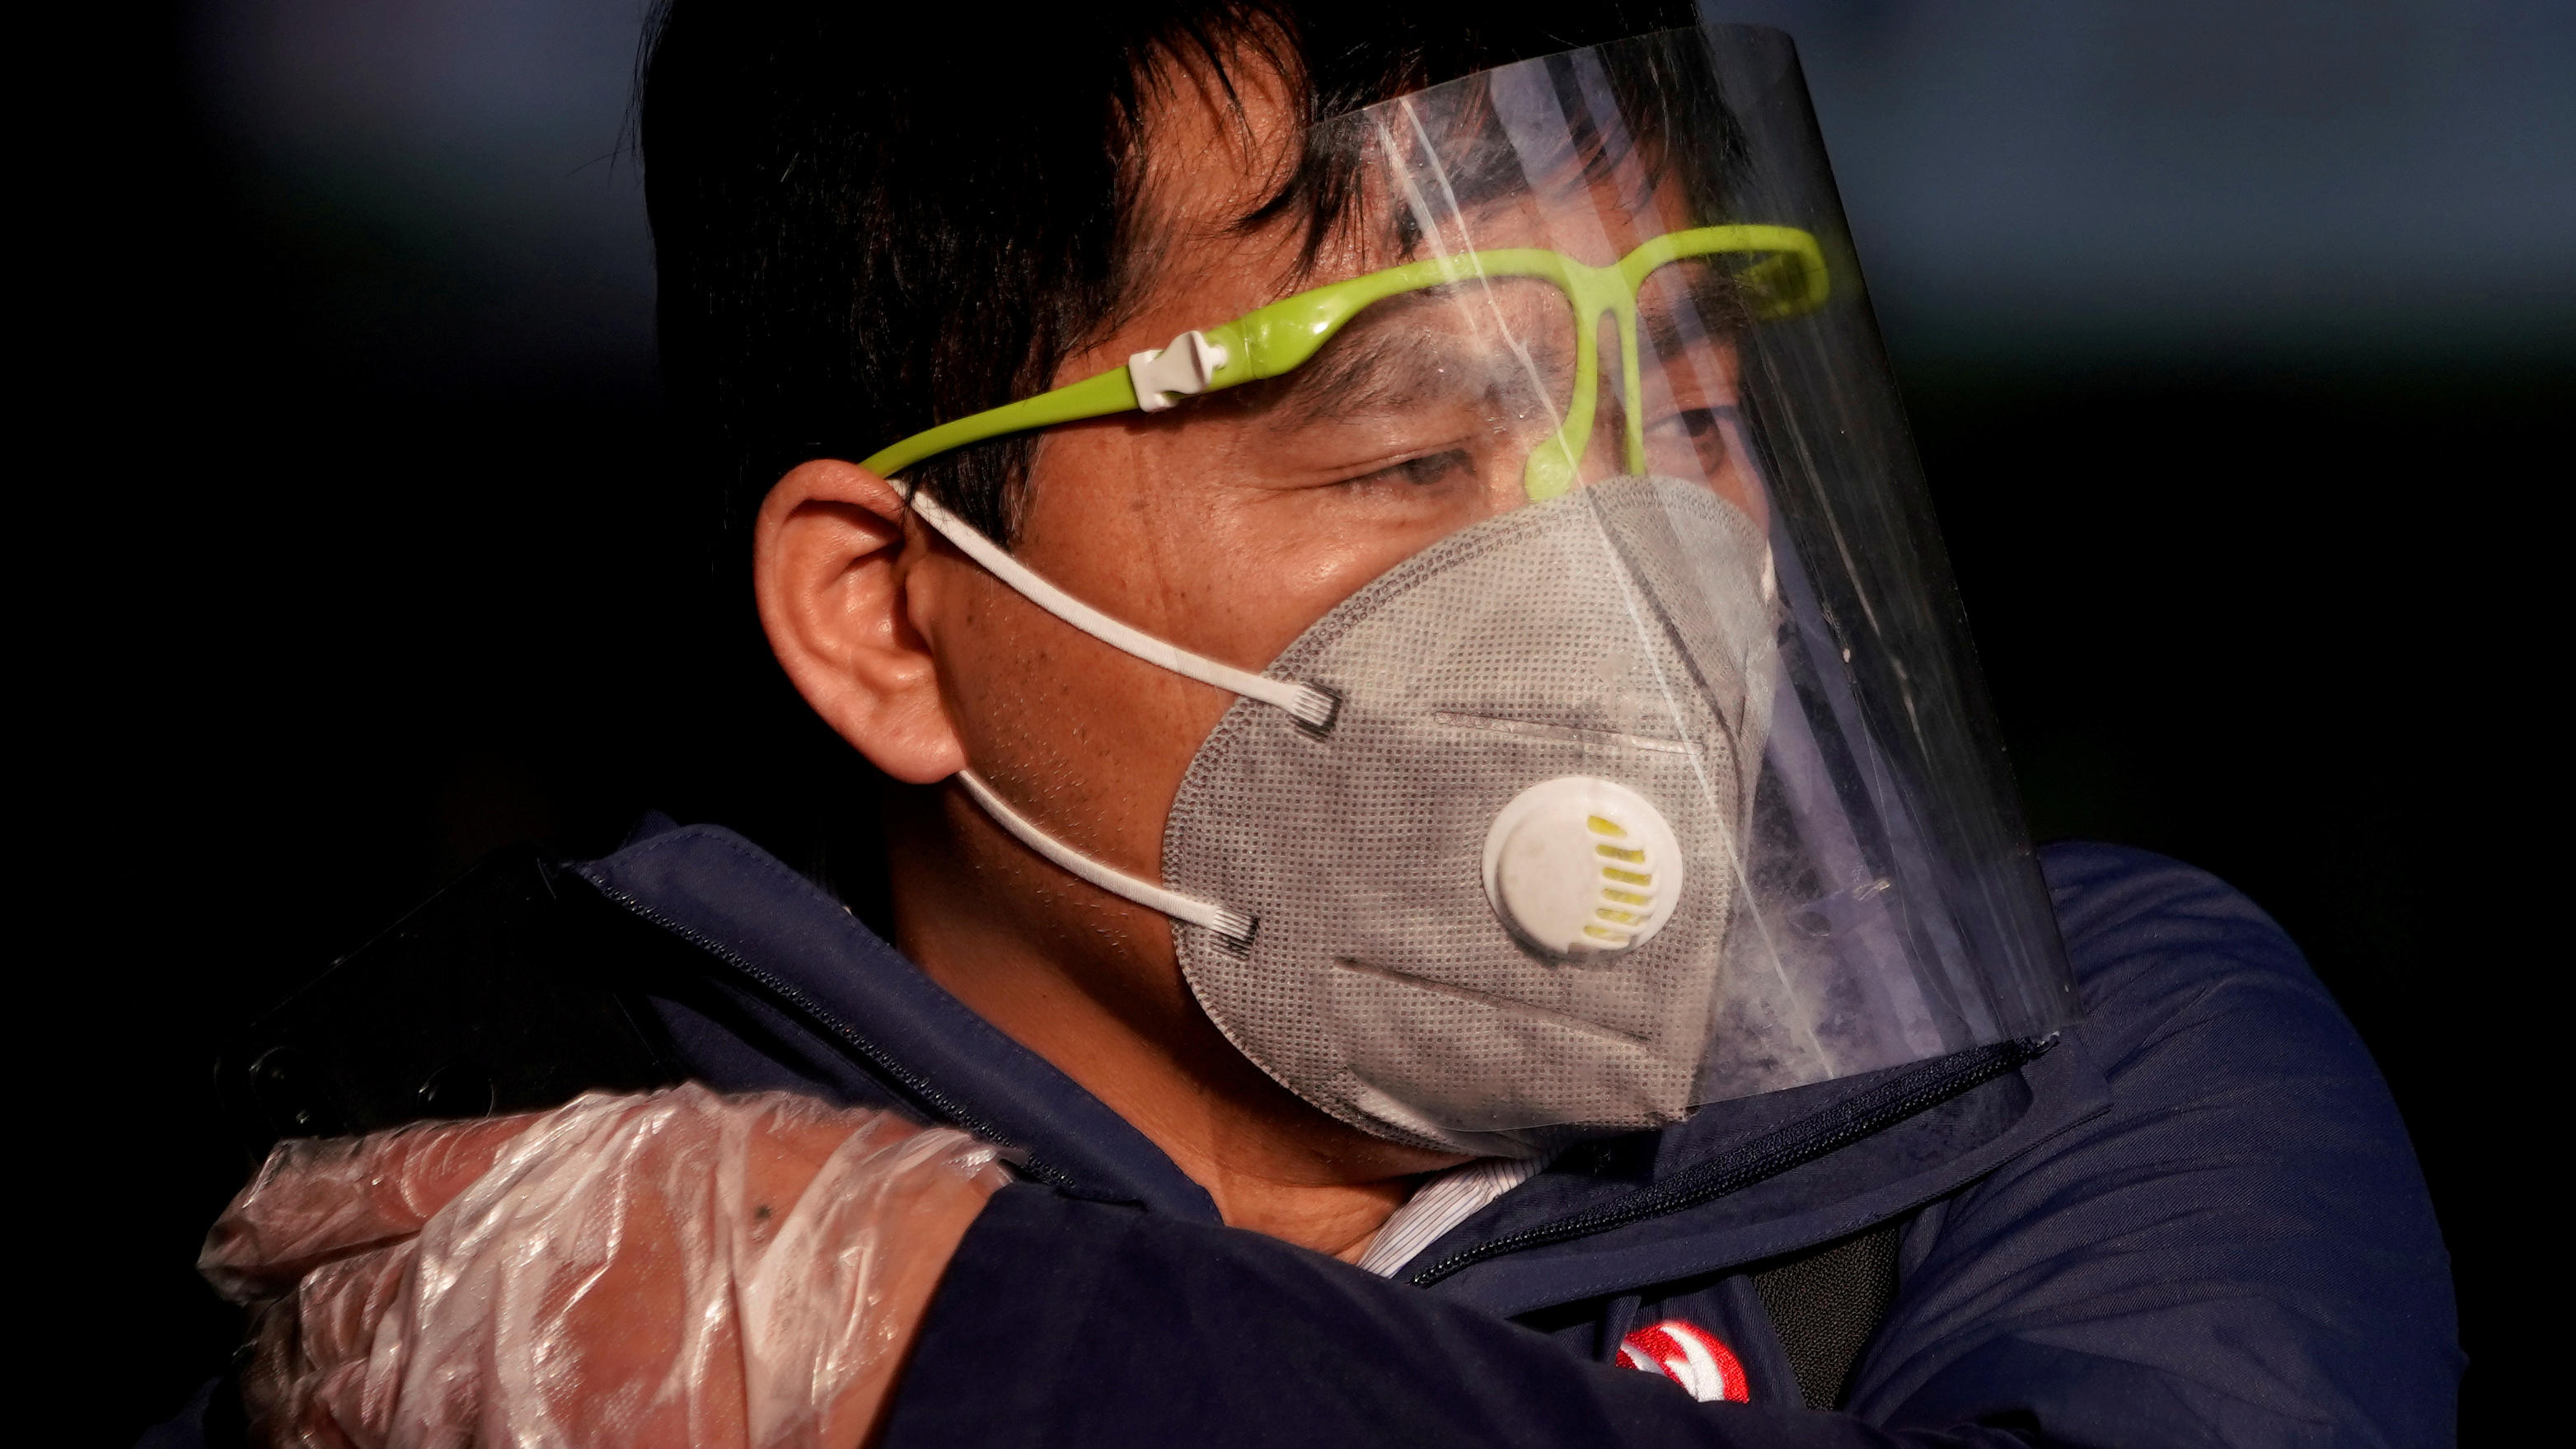 FILE PHOTO: A man wearing a mask is seen at the Shanghai railway station in Shanghai, China, as the country is hit by an outbreak of the novel coronavirus, February 12, 2020. REUTERS/Aly Song/File Photo